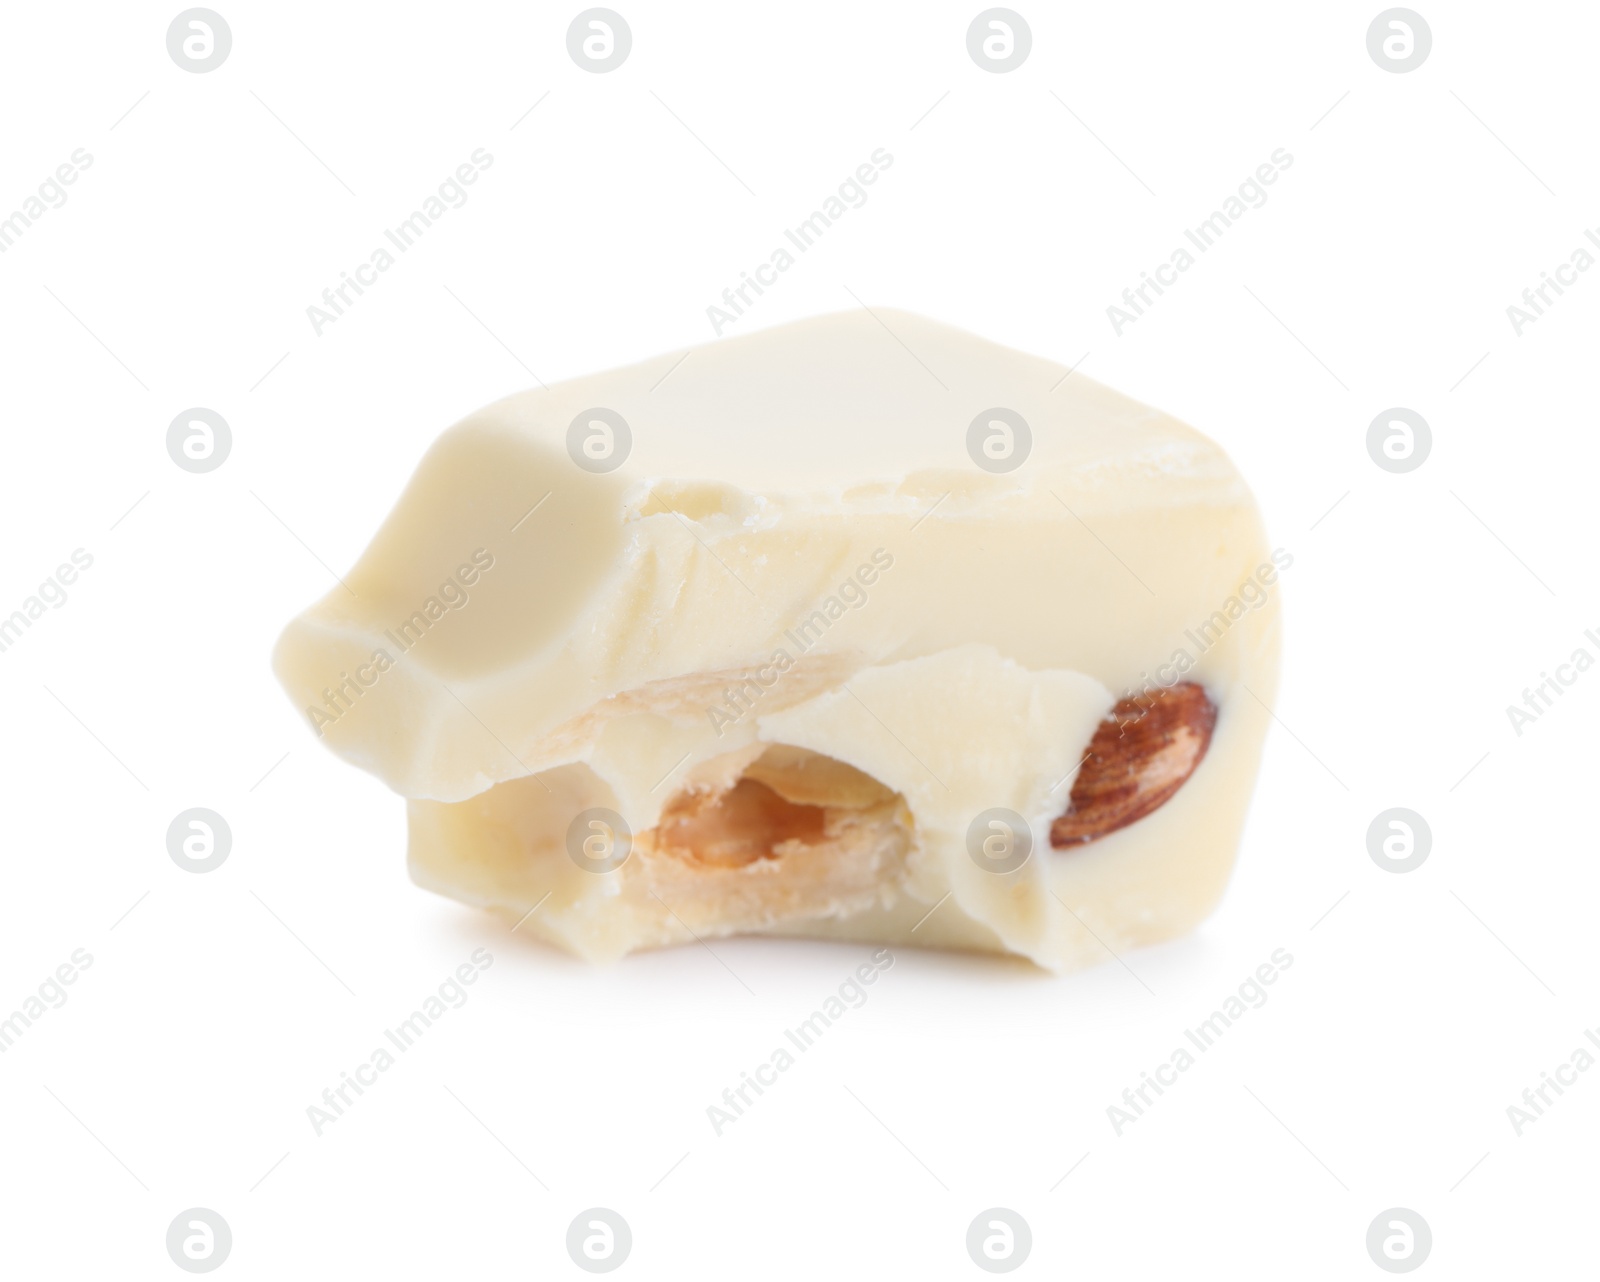 Photo of Piece of delicious chocolate with nuts isolated on white